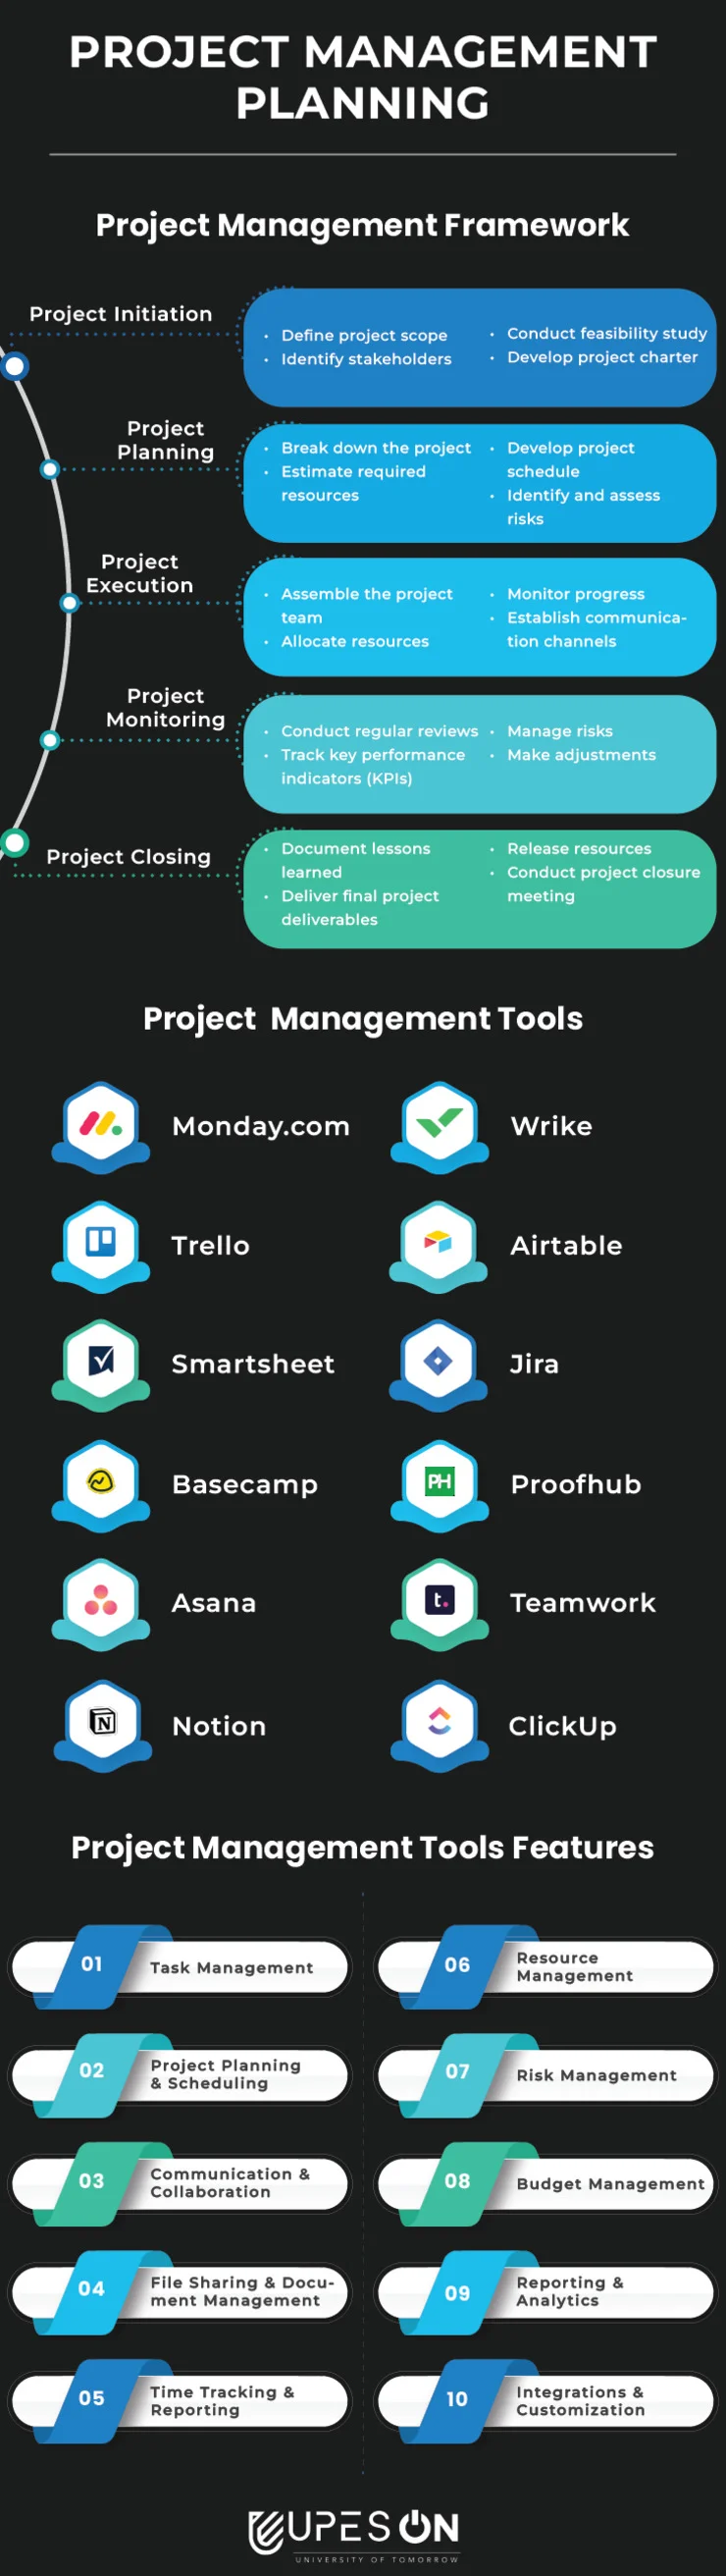 project-management-frameworks-and-features